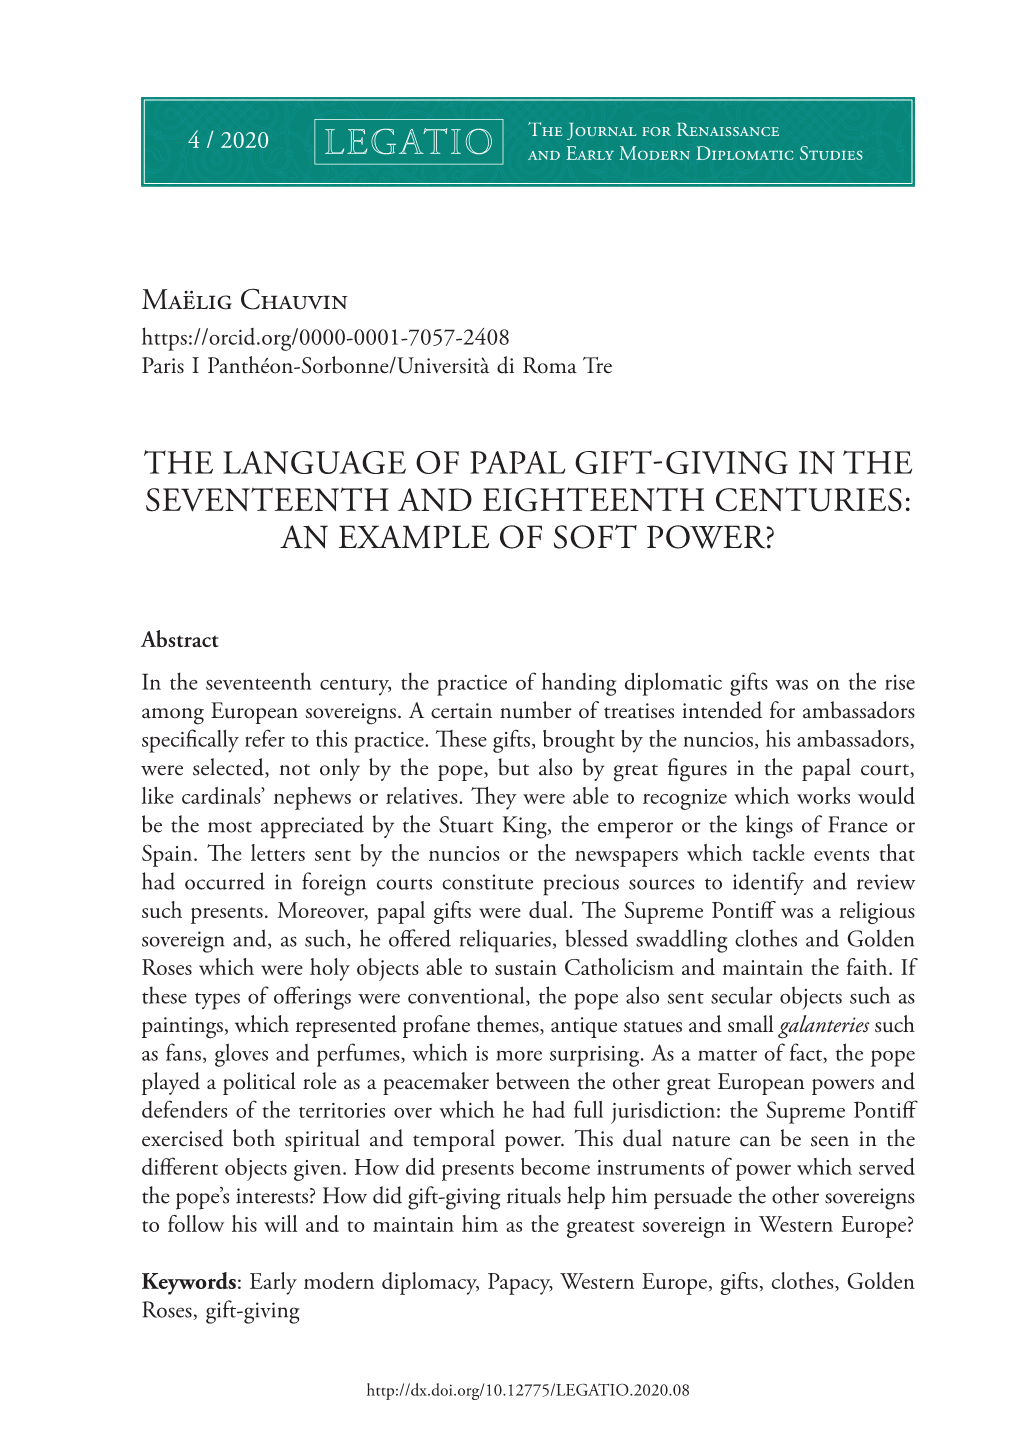 The Language of Papal Gift-Giving in the Seventeenth and Eighteenth Centuries: an Example of Soft Power?